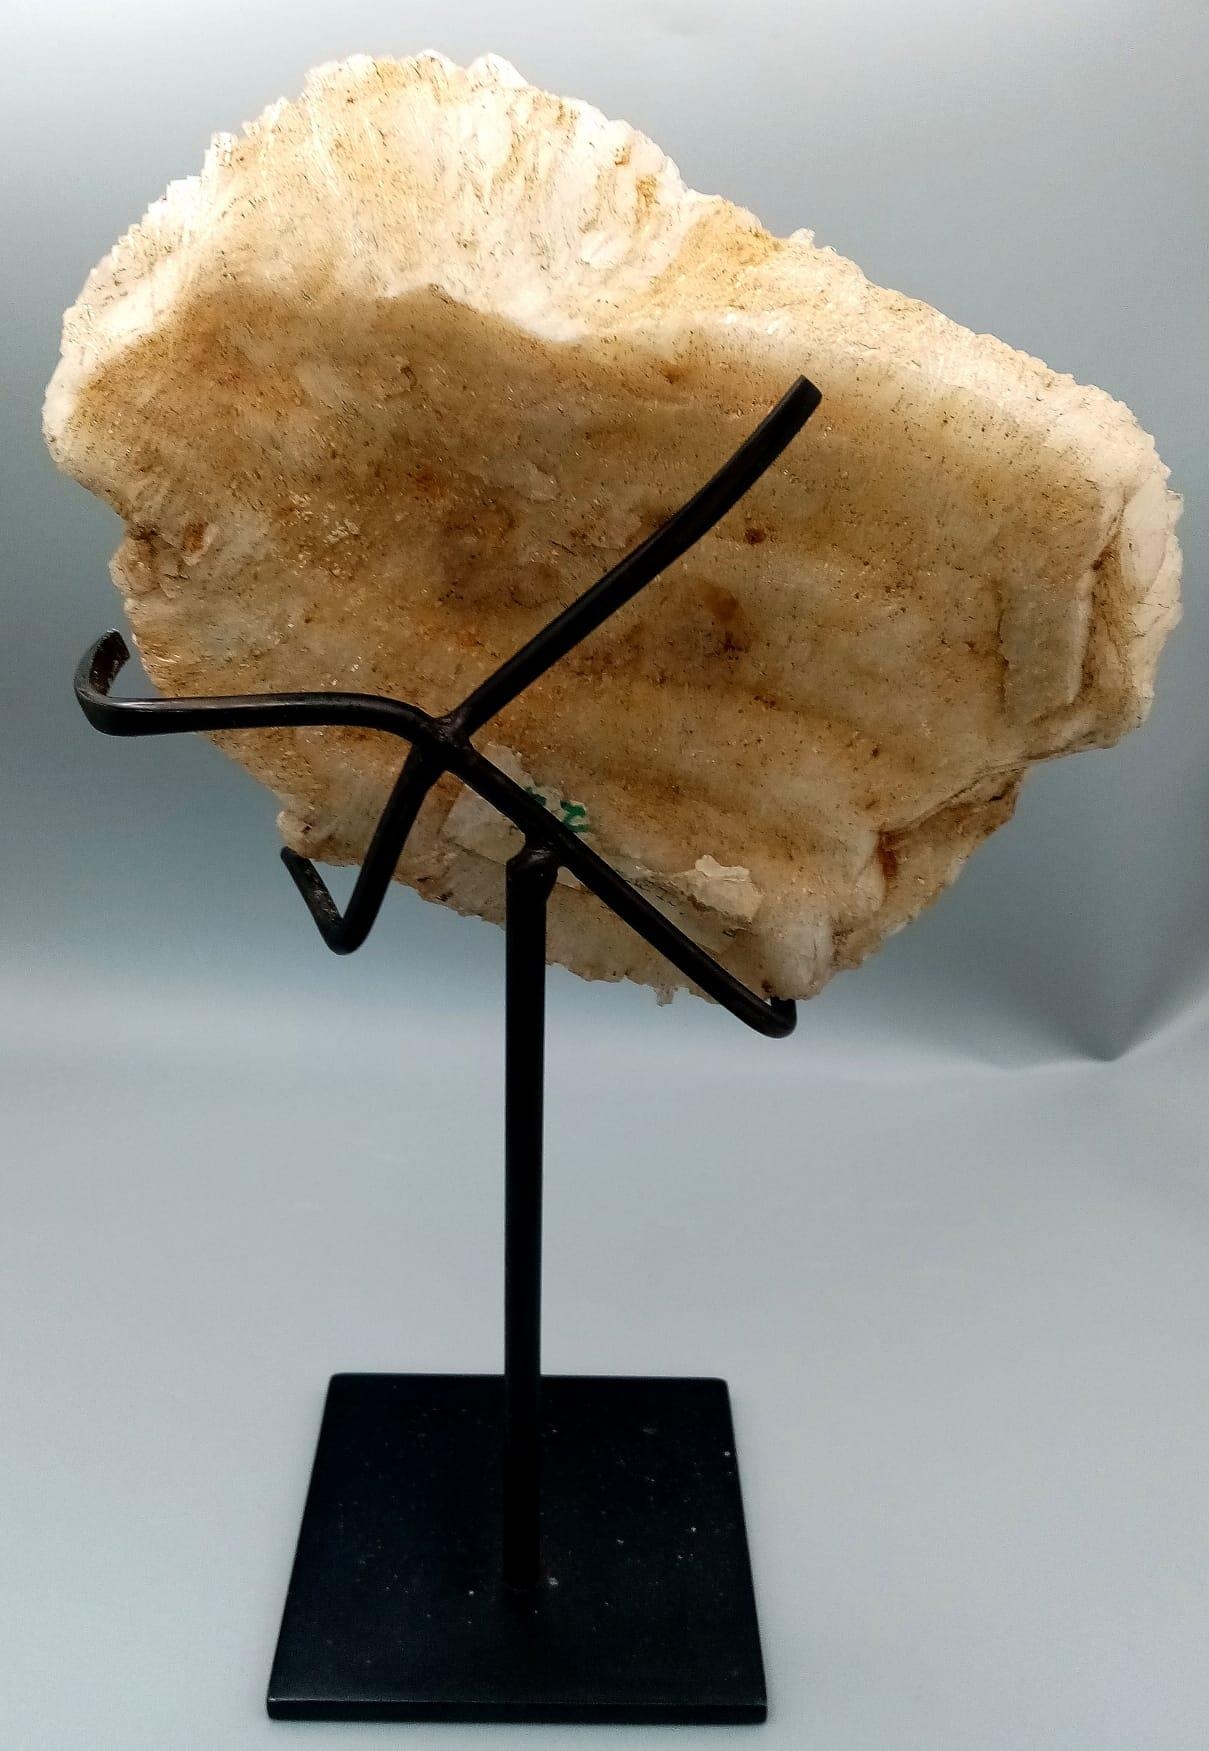 A Large Crystal Mass Specimen of Clevelandite Crystals - on metal stand. 14cm x 16cm. 1020g weight. - Image 4 of 4